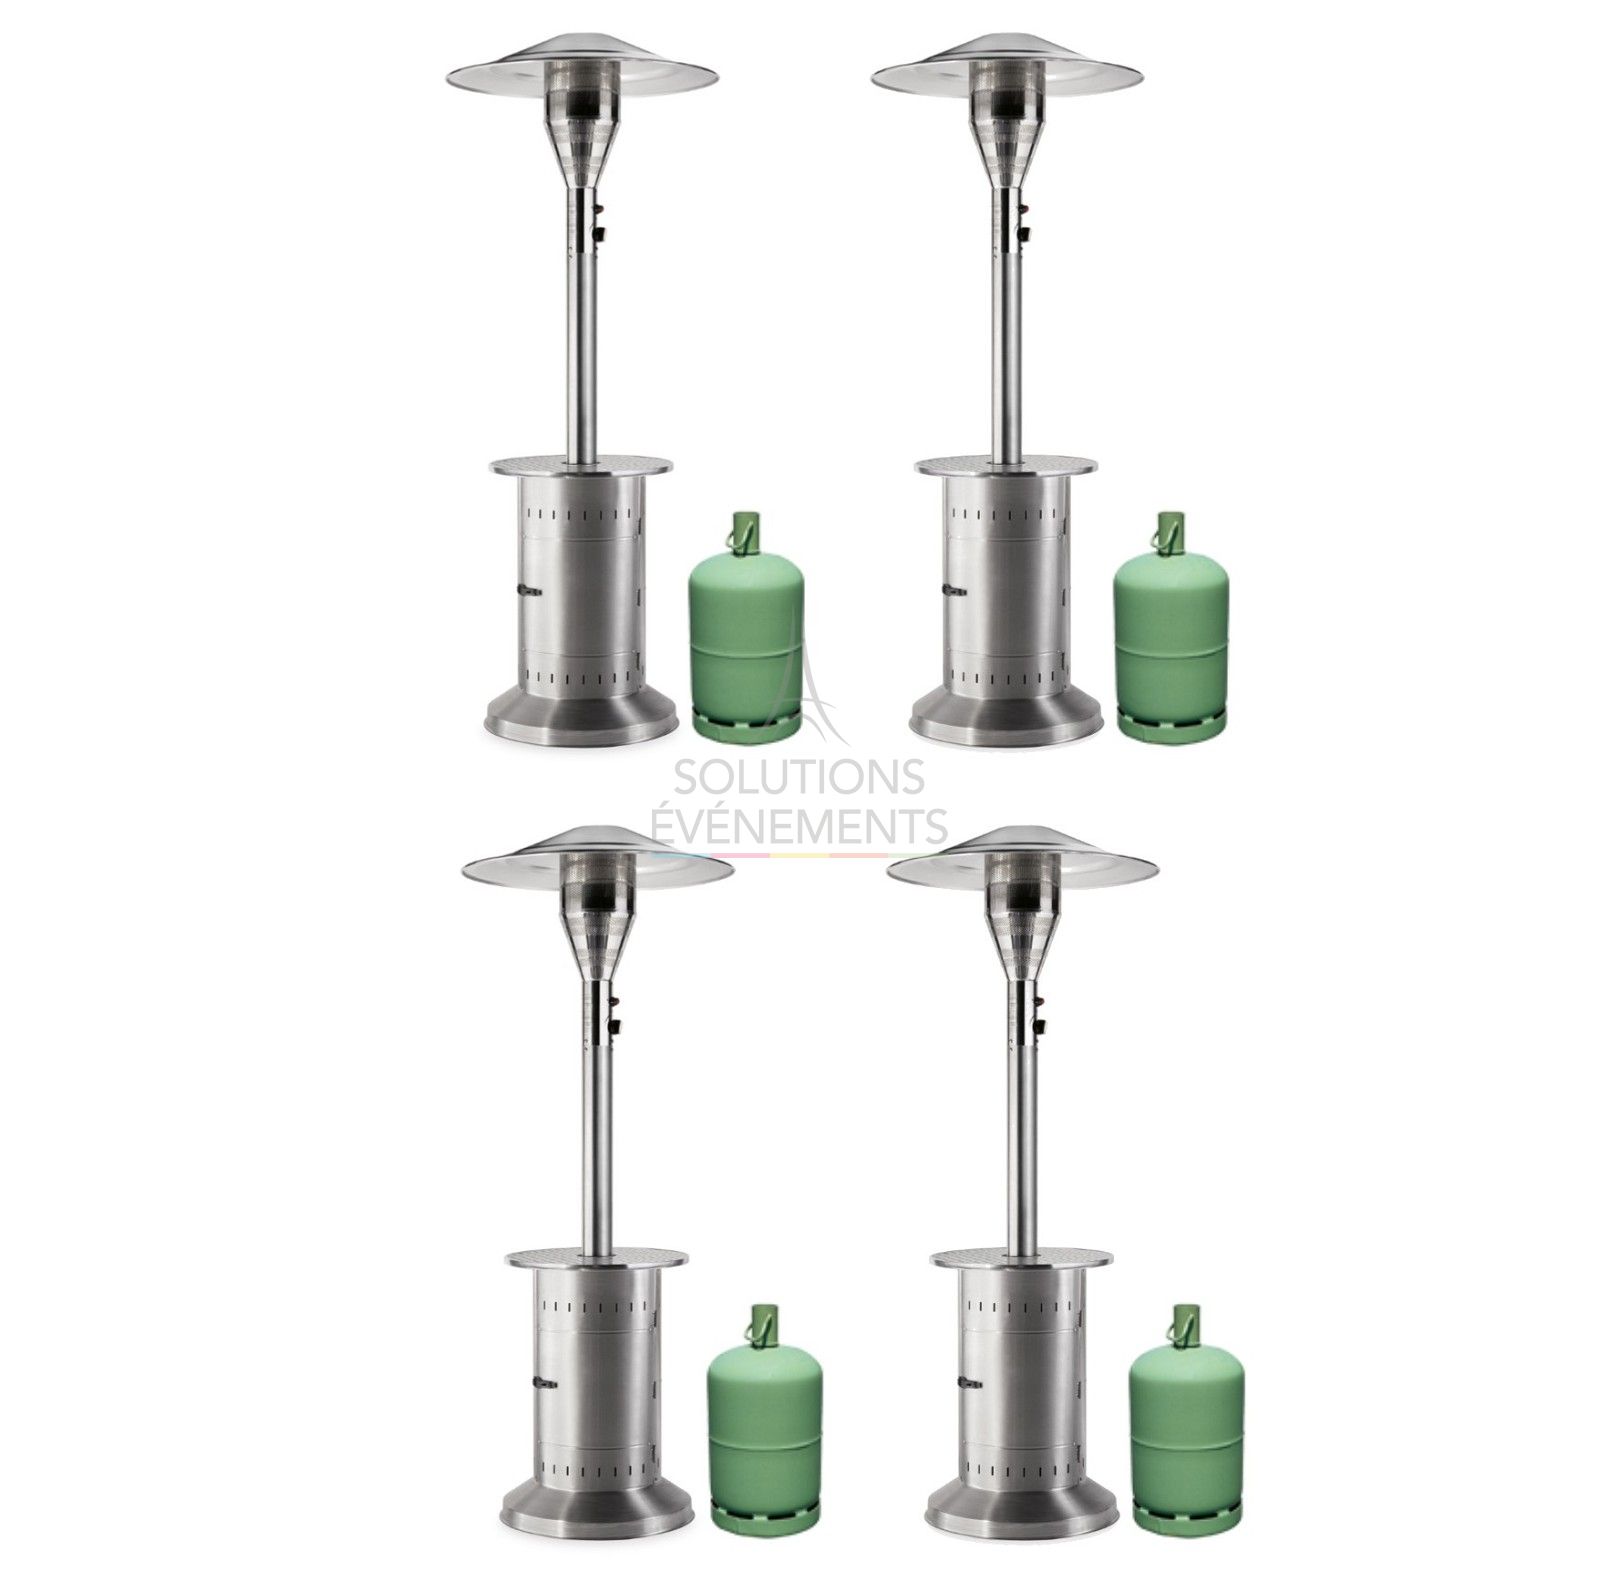 Rental of a pack of 4 gas heated patio parasol heaters